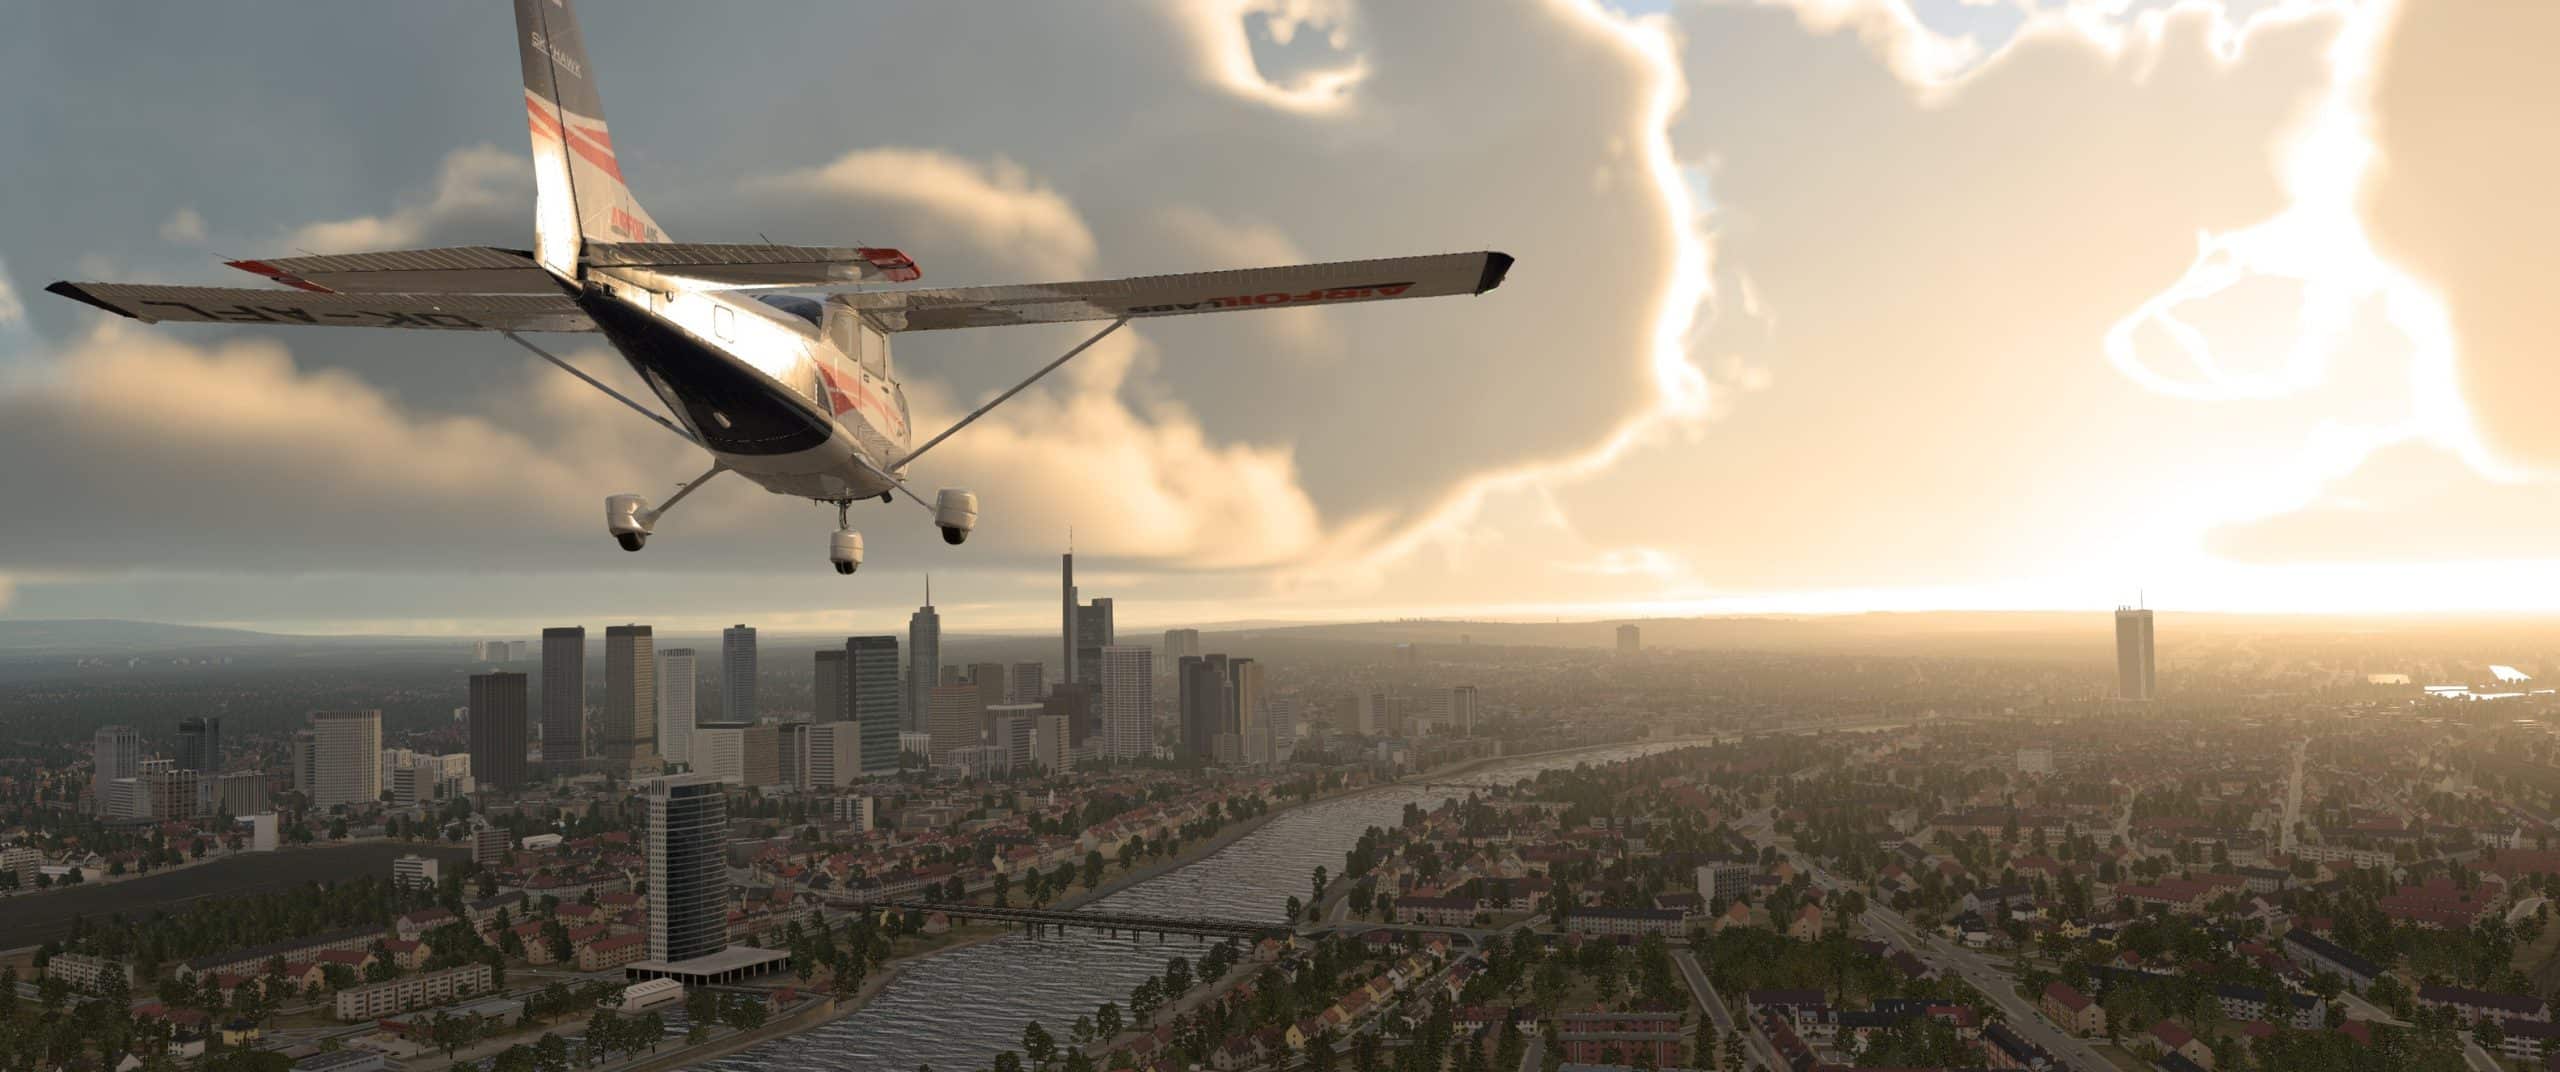 Airfoillabs Previews Cessna 172 for XP12 - AirFoilLabs, X-Plane